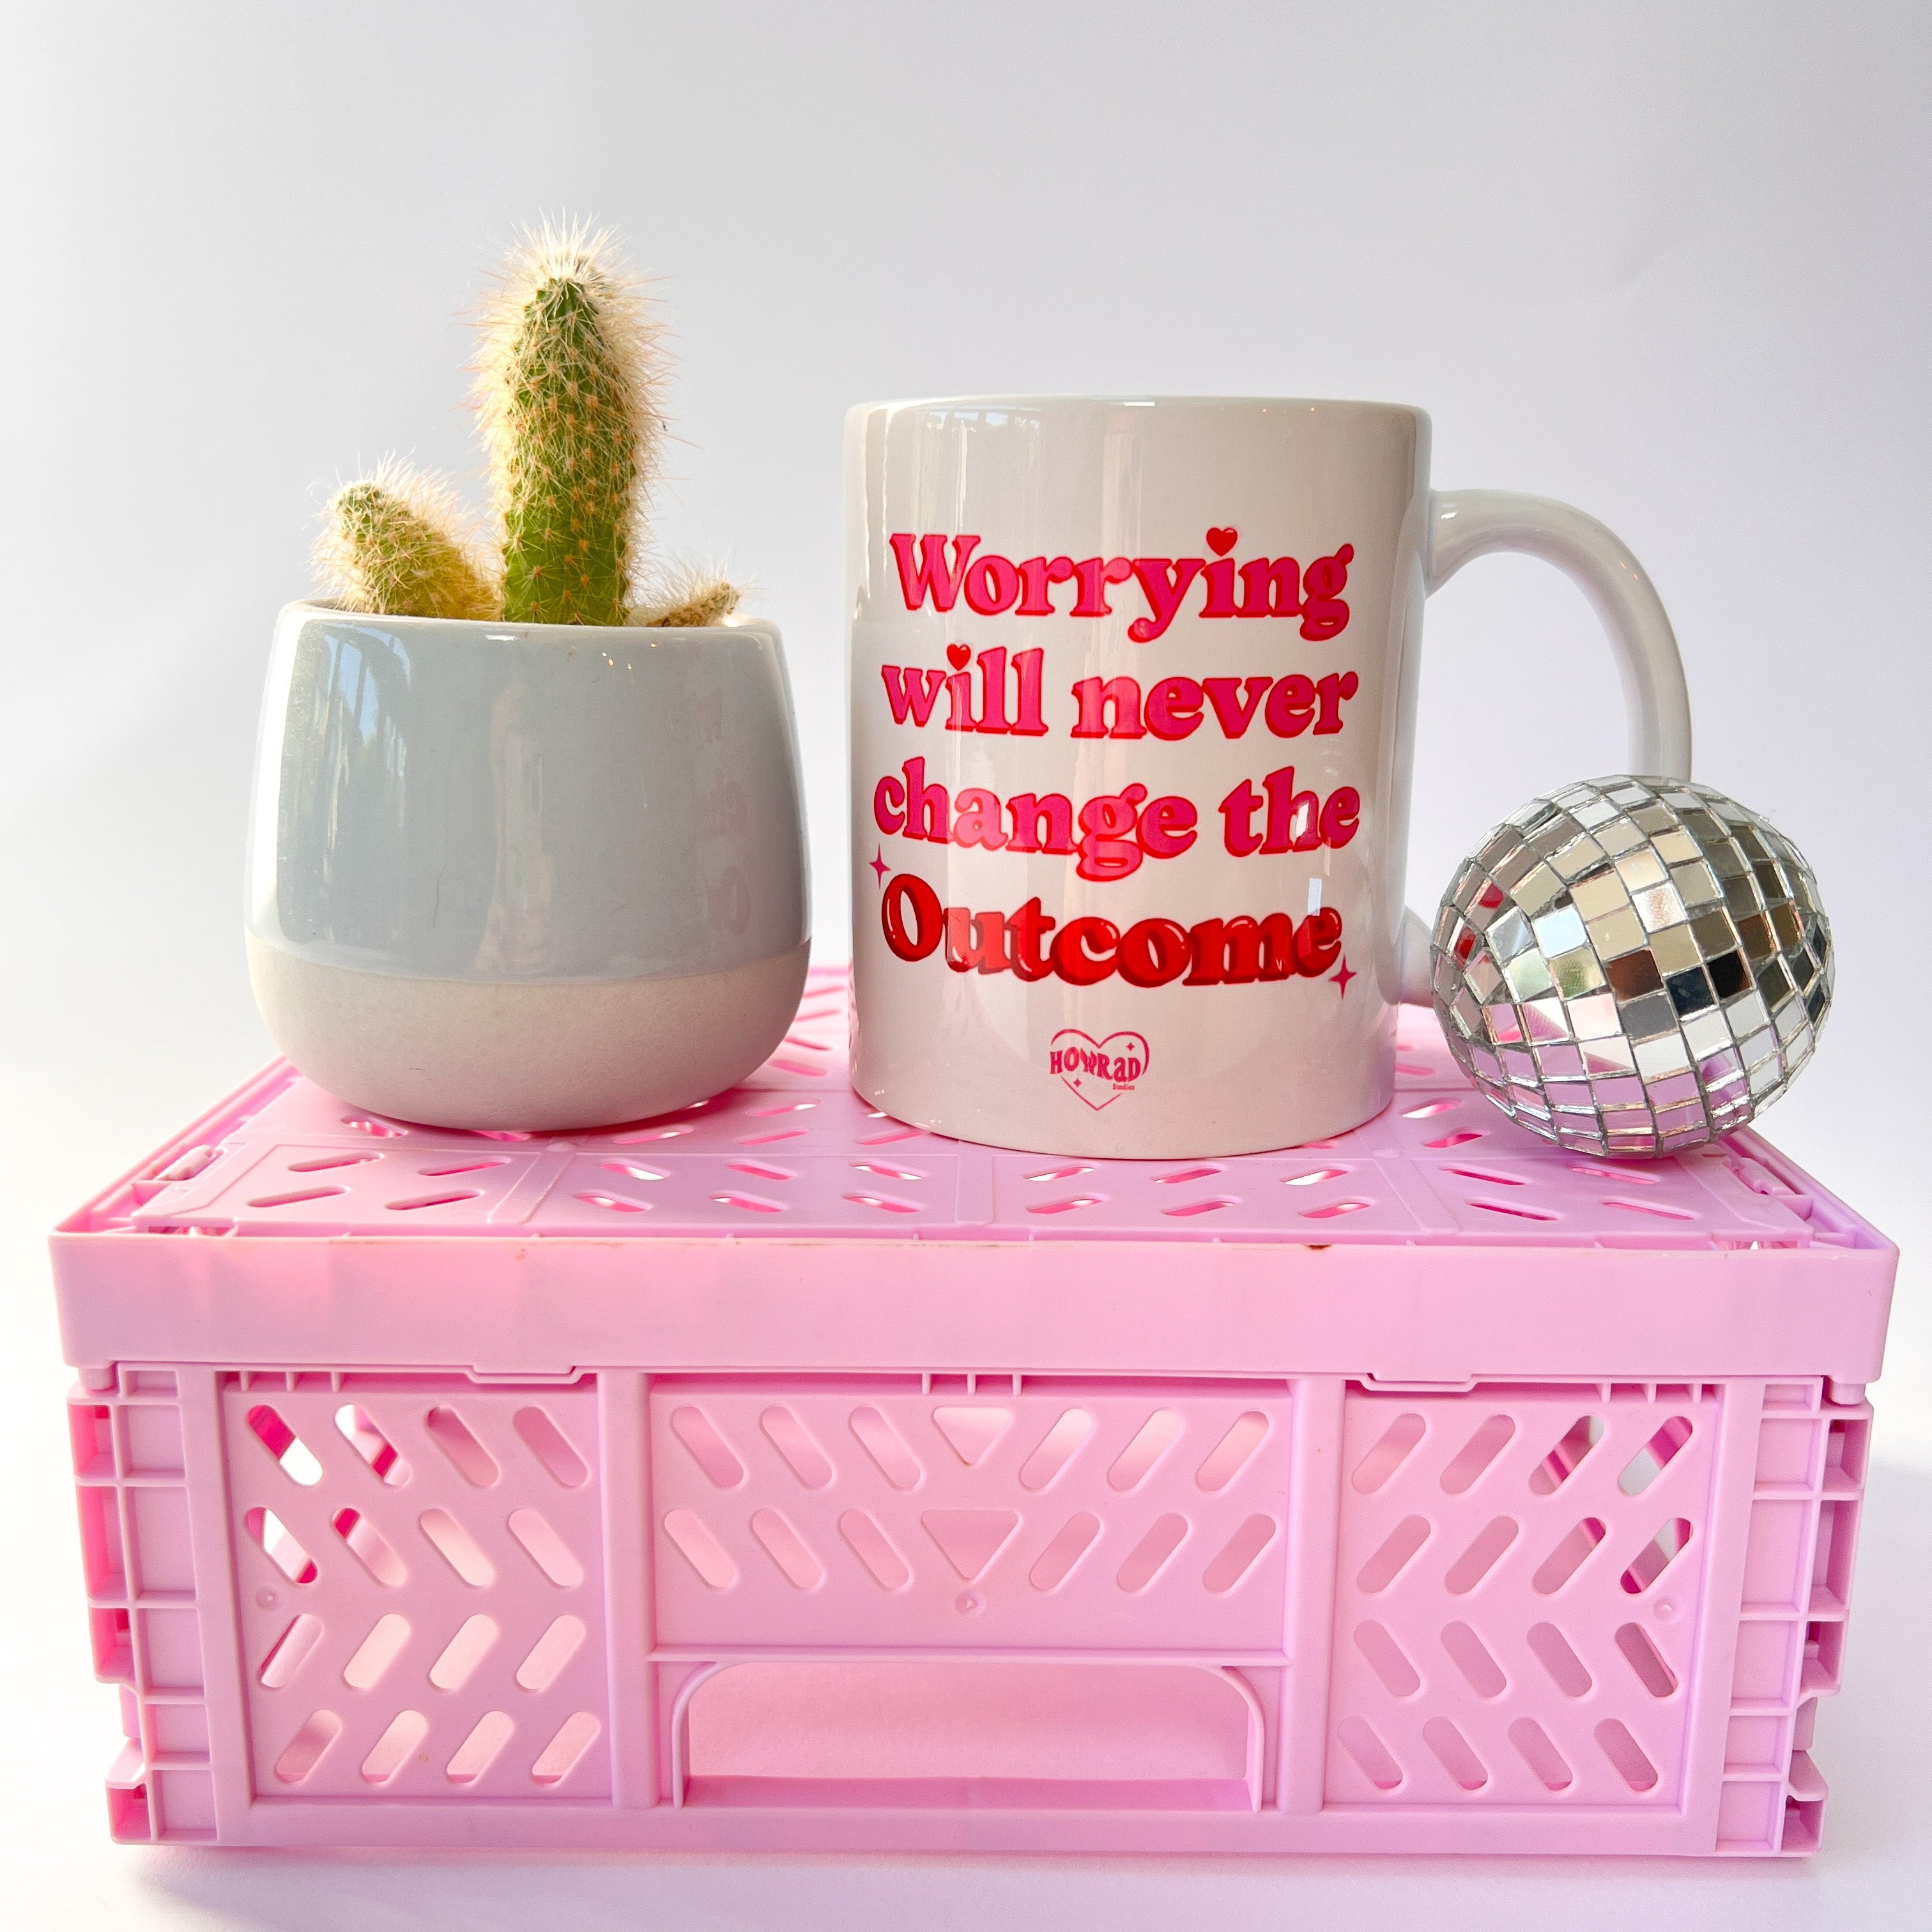 Worrying will never change the outcome mug